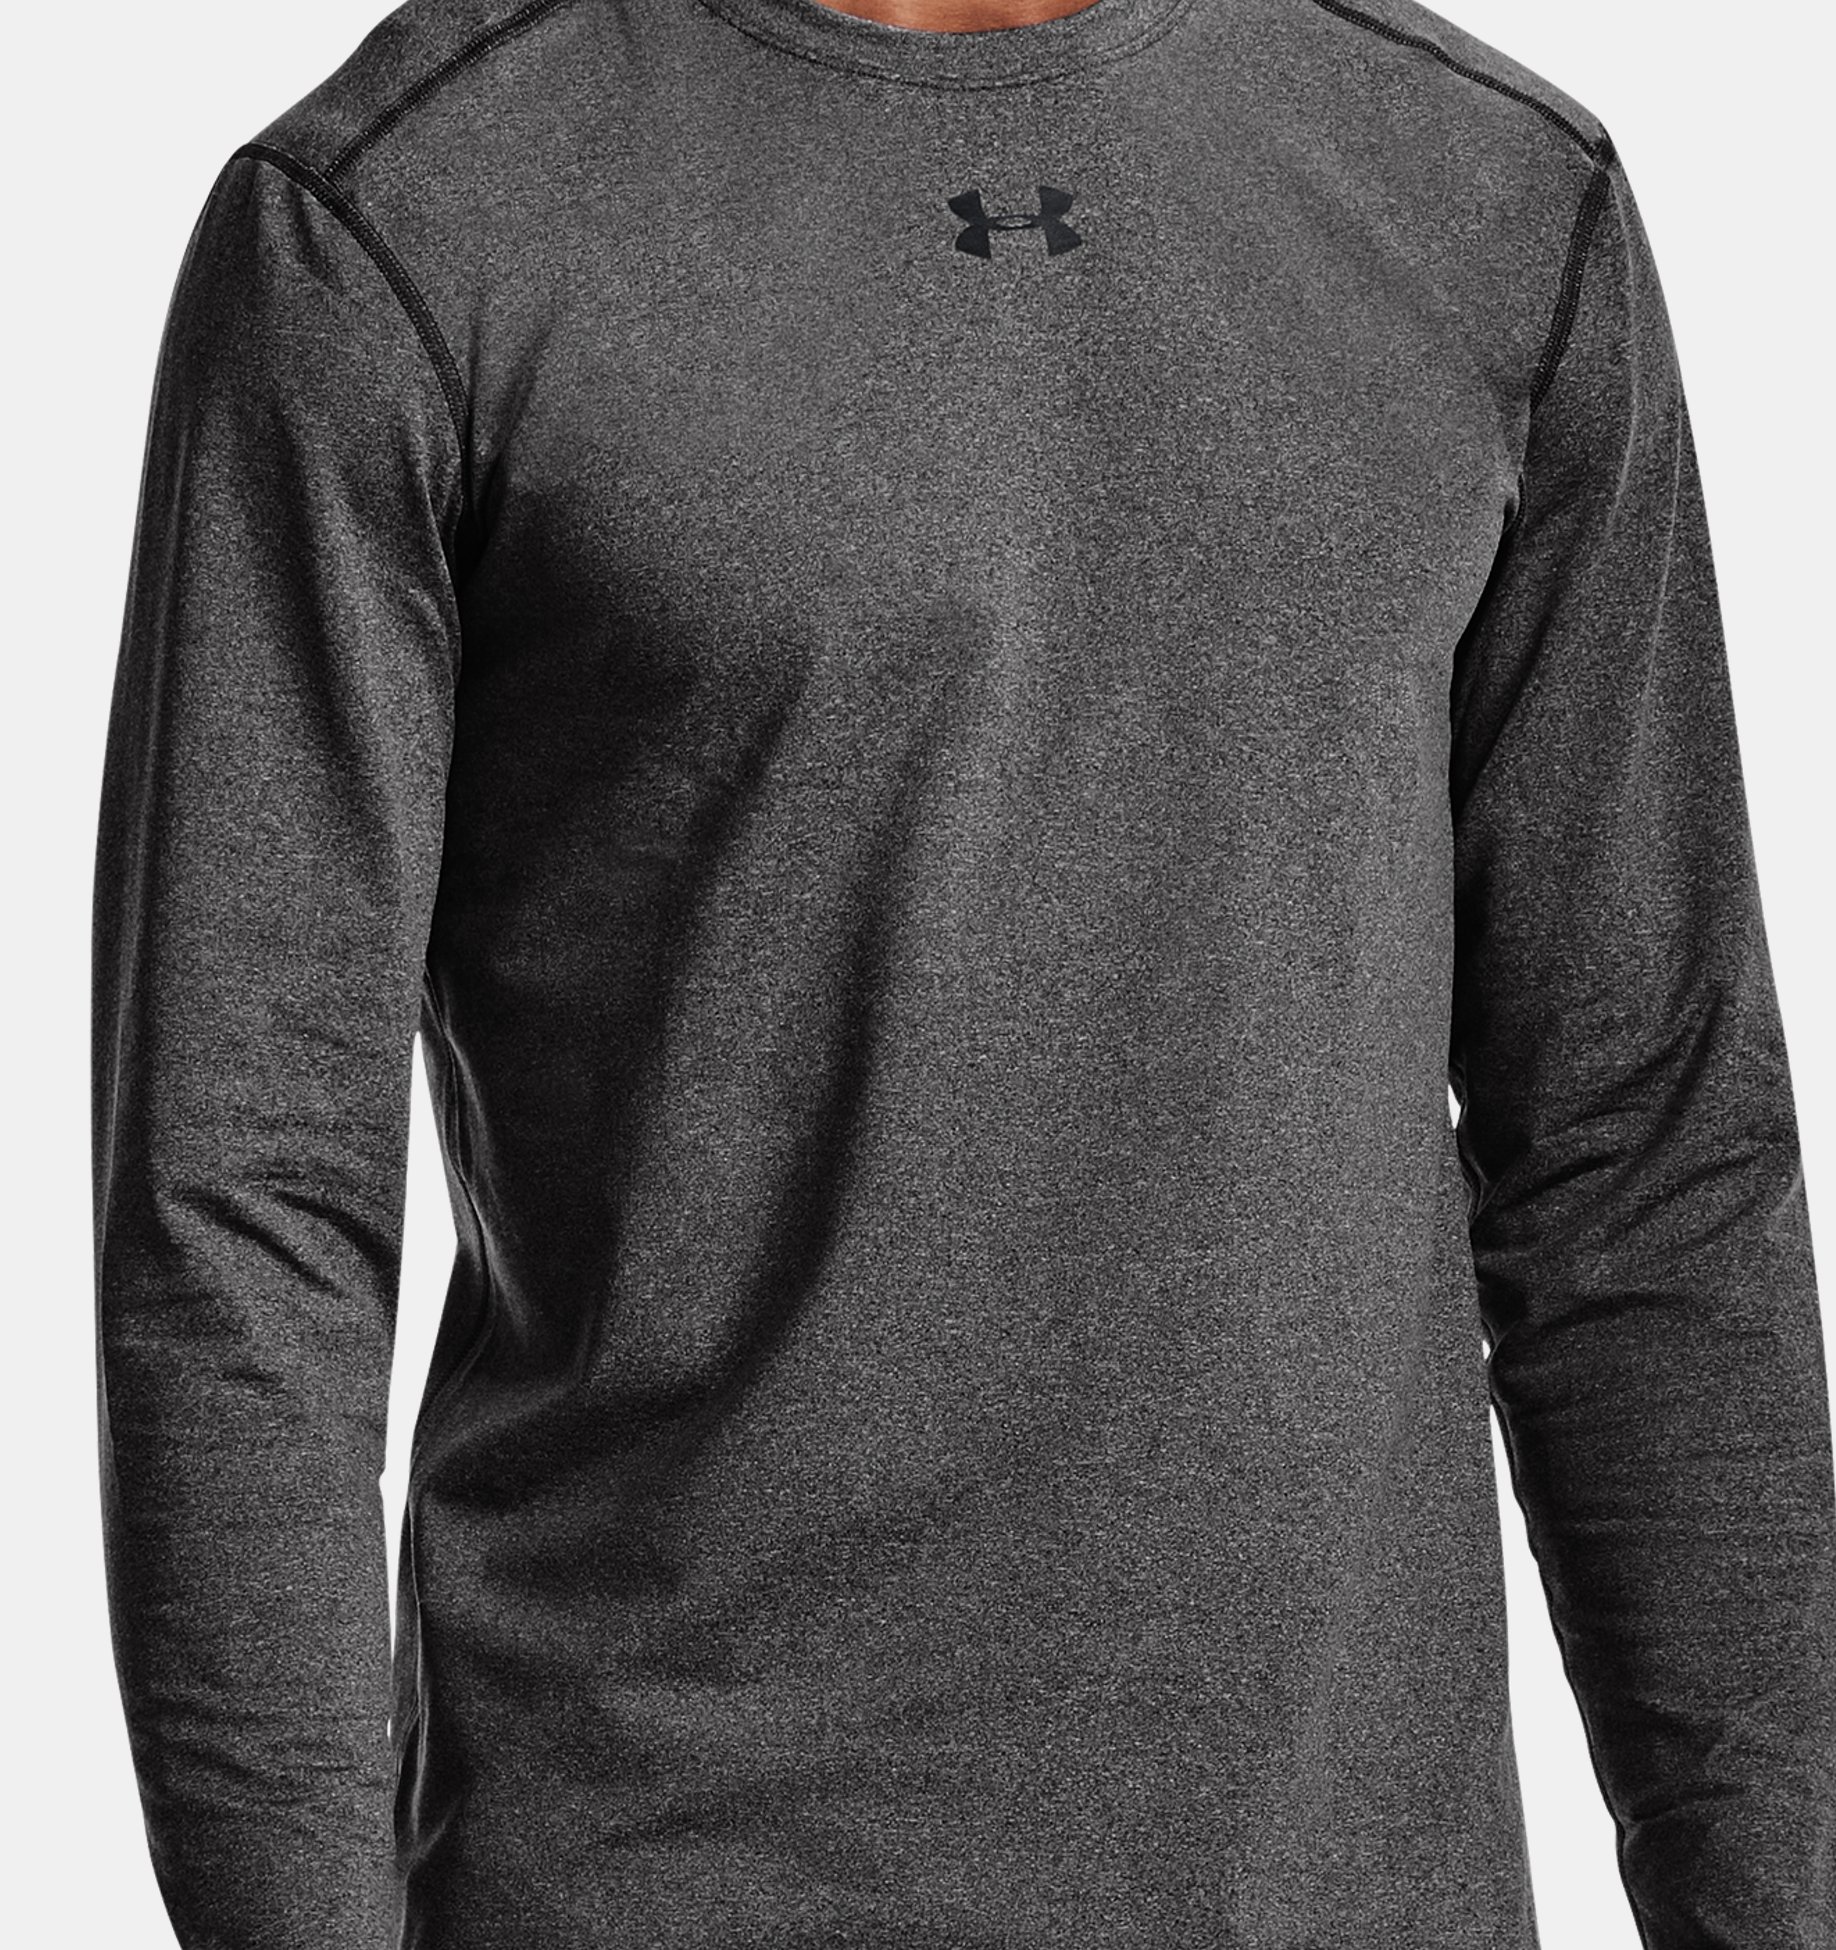 bestia Corrupto frontera Men's ColdGear® Armour Fitted Crew | Under Armour